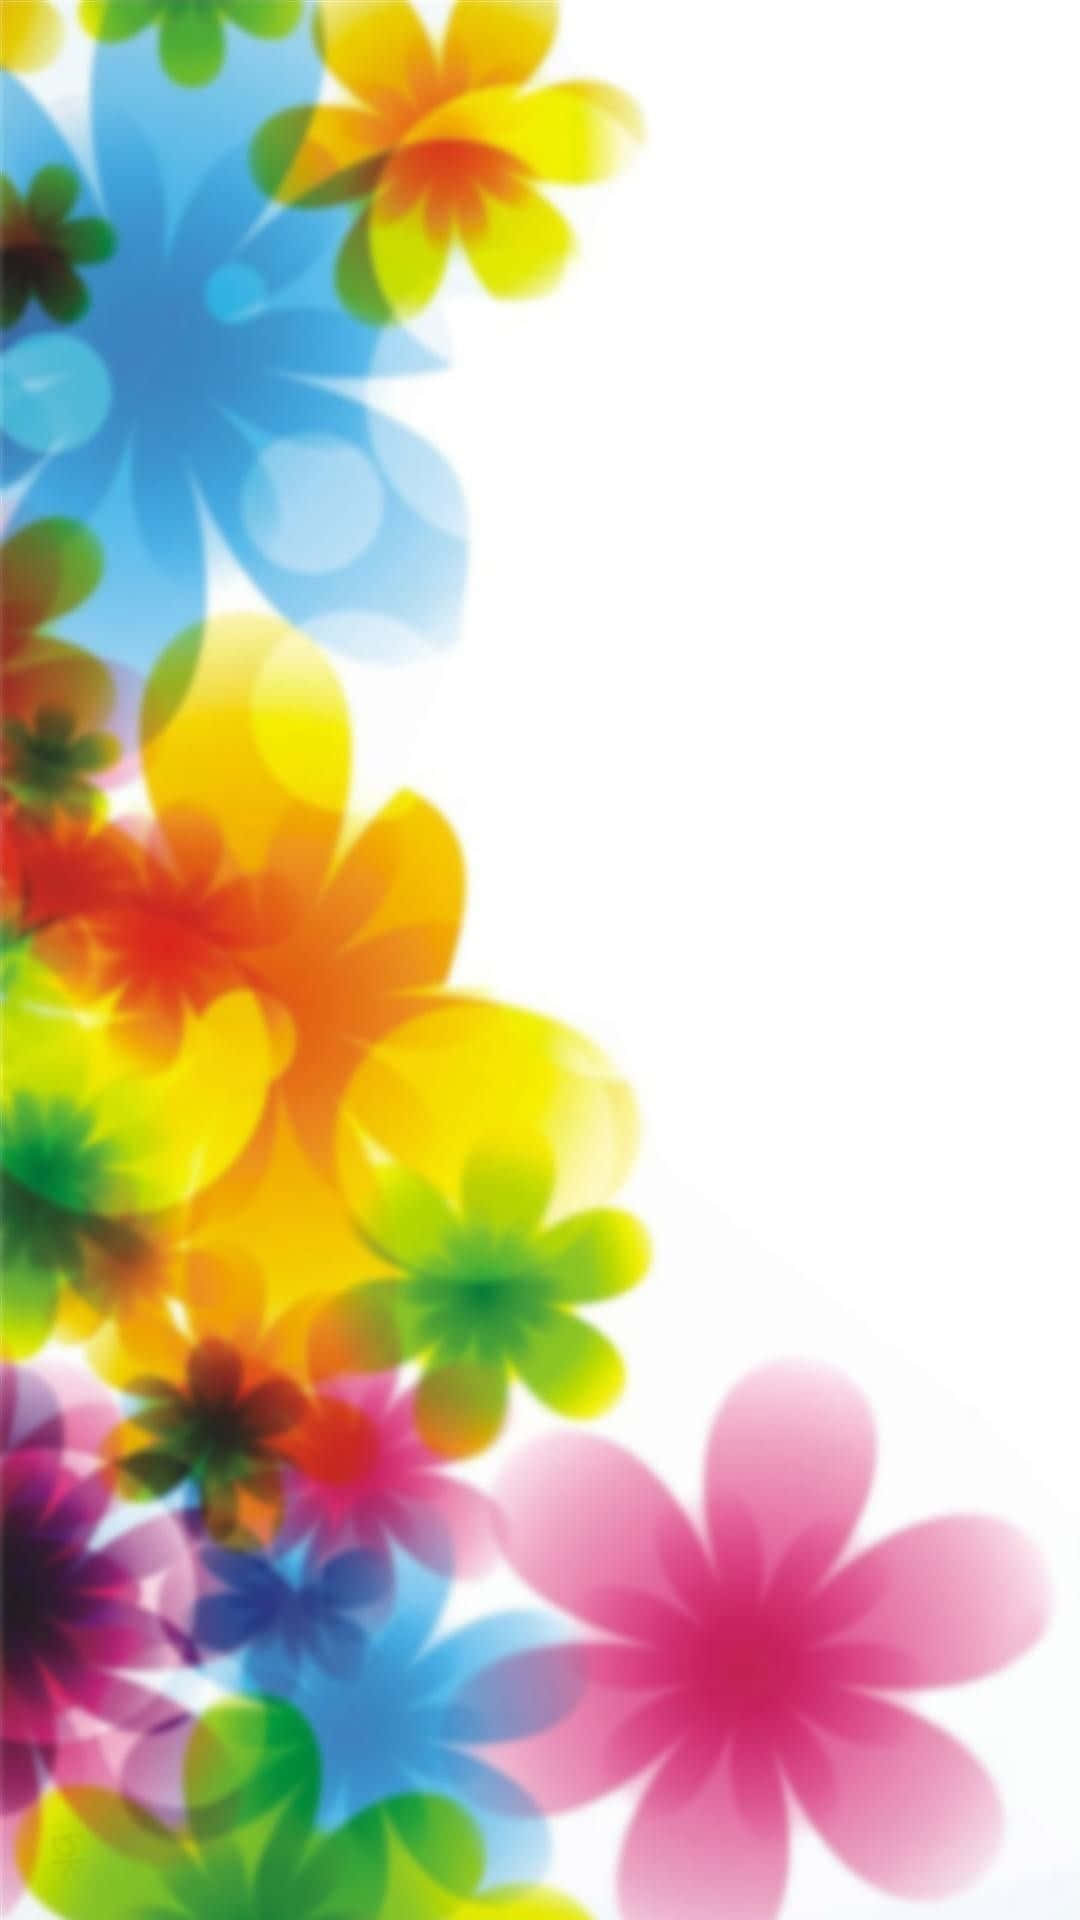 Colorful Flowers On A White Background Wallpaper